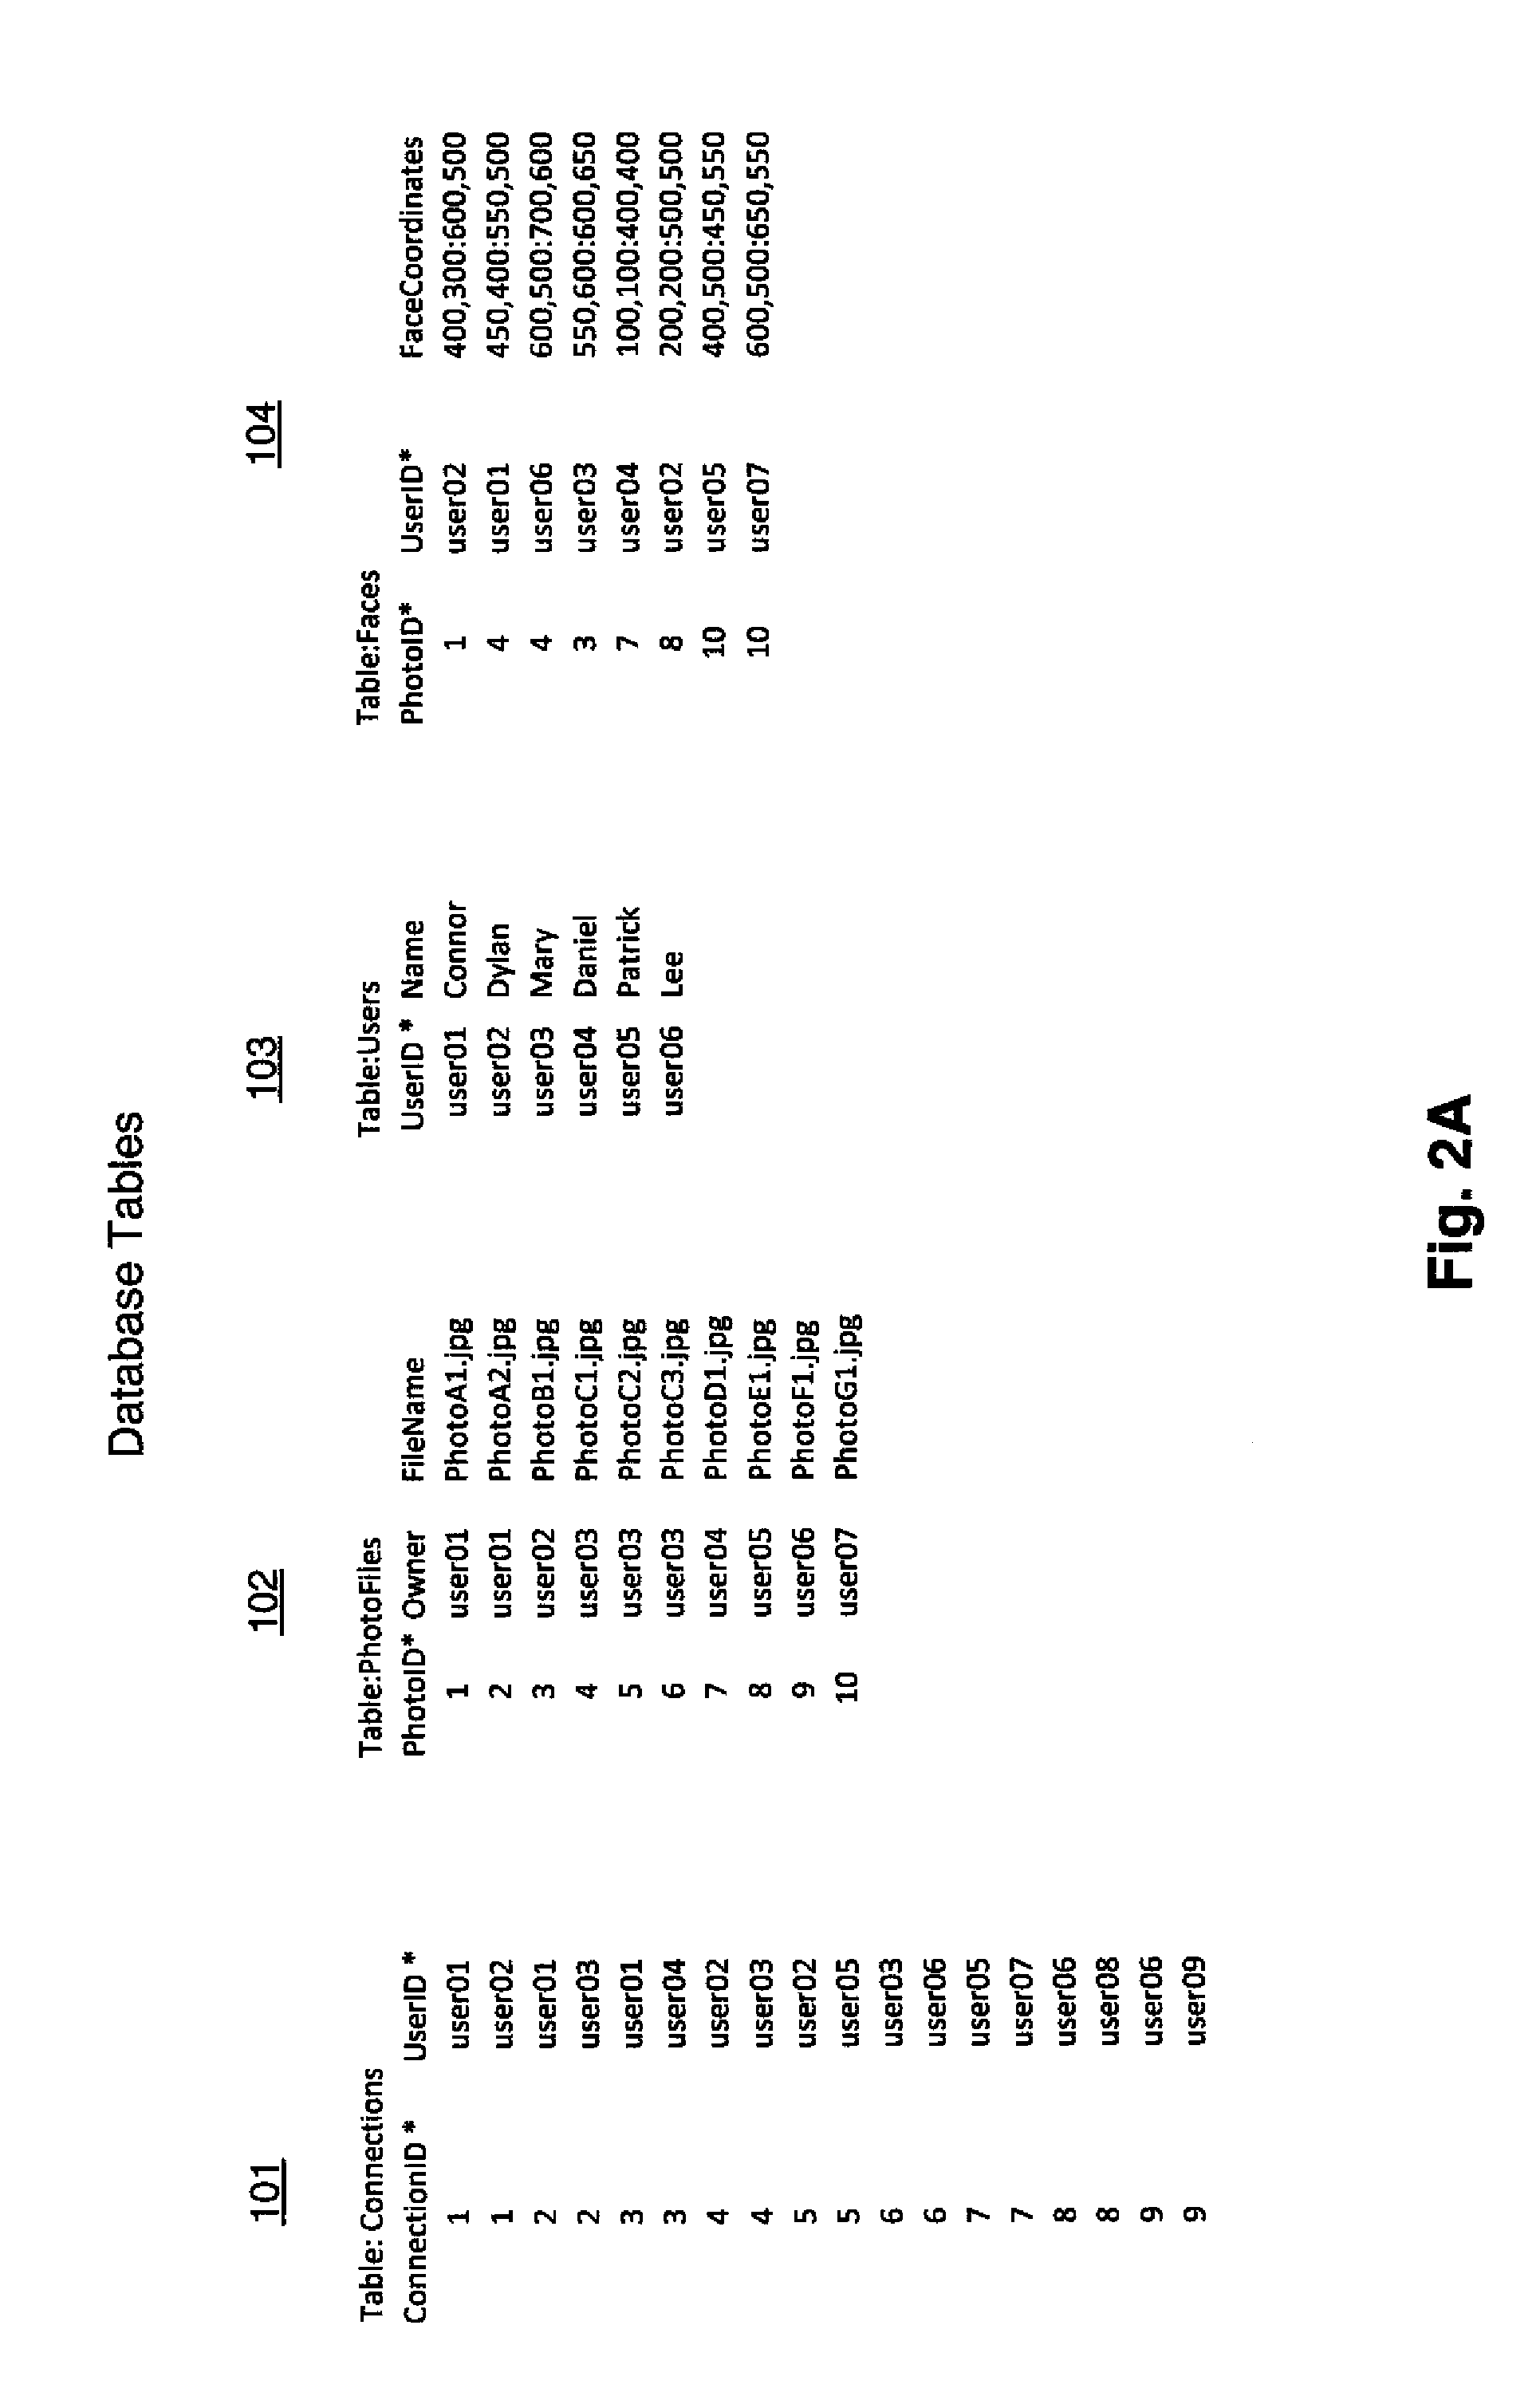 Method of person identification using social connections